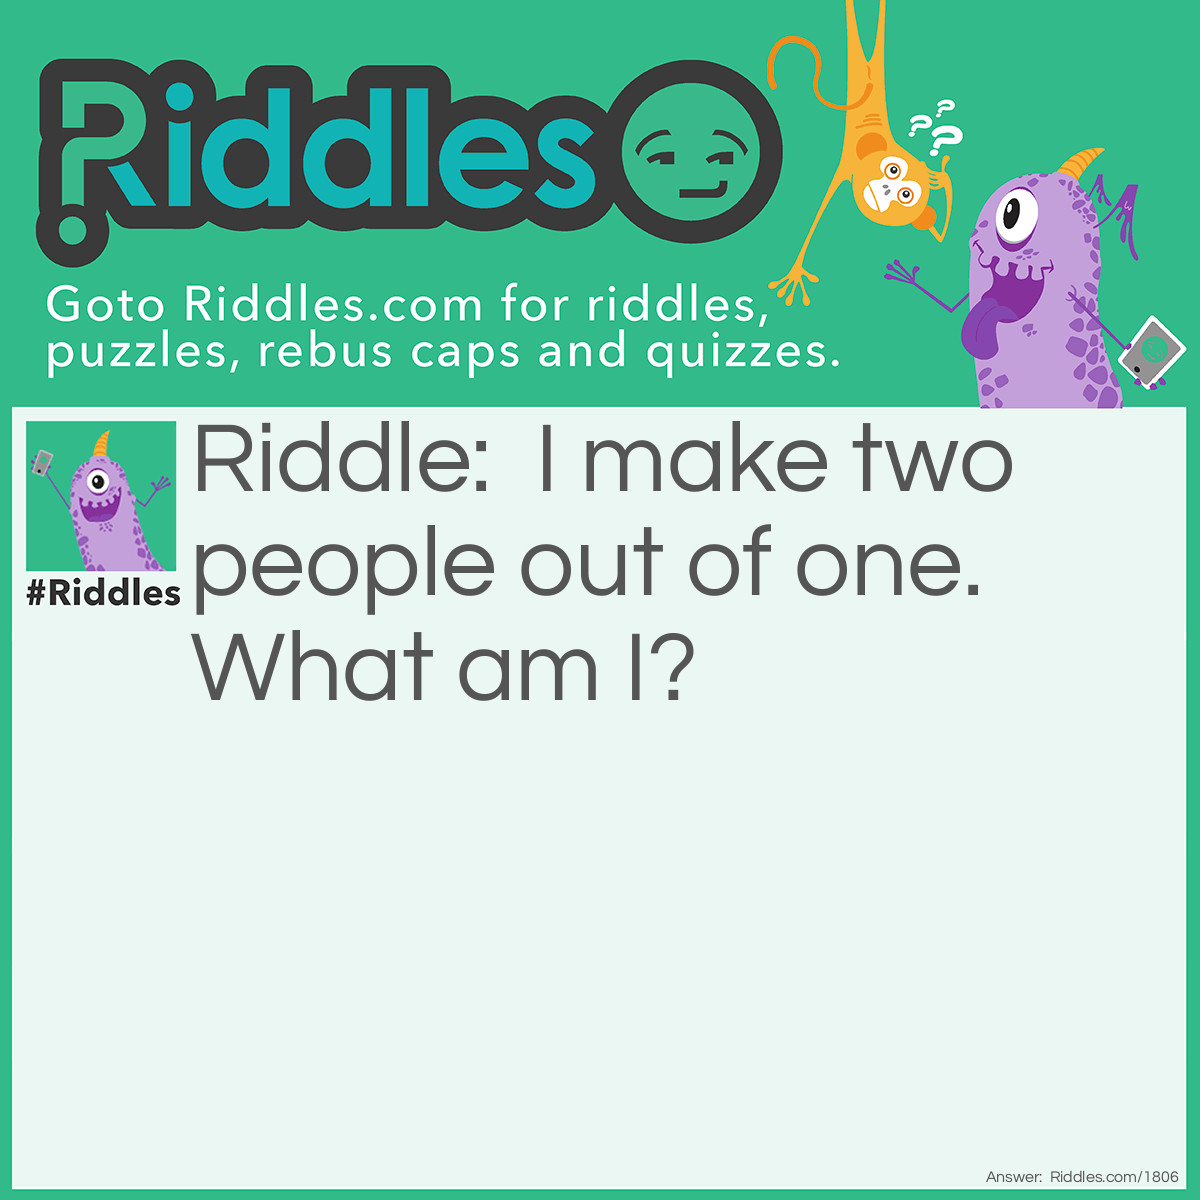 Riddle: I make two people out of one. What am I? Answer: A mirror.